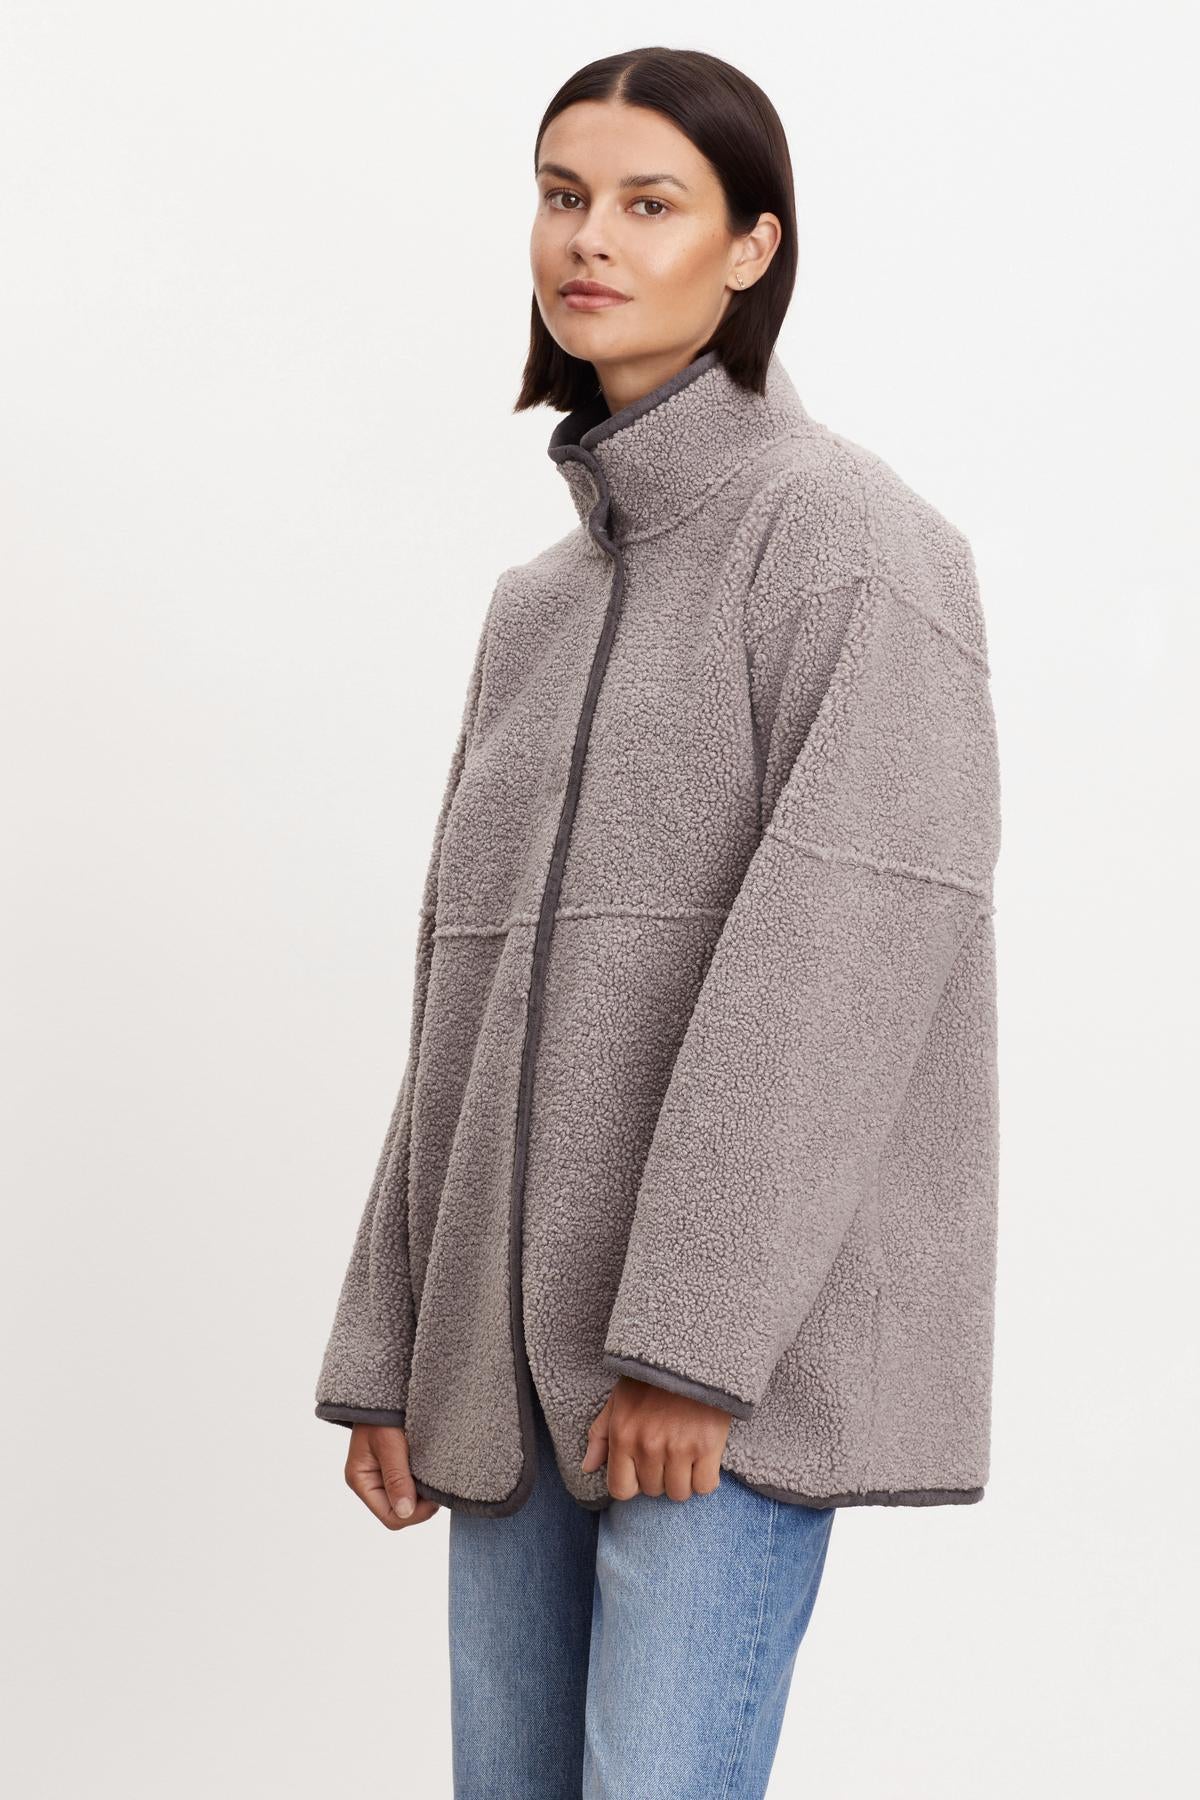 A person wearing a gray ALBANY LUX SHERPA REVERSIBLE JACKET by Velvet by Graham & Spencer and blue jeans stands against a plain white background. The reversible jacket is zipped up and has a high collar.-36094291017921